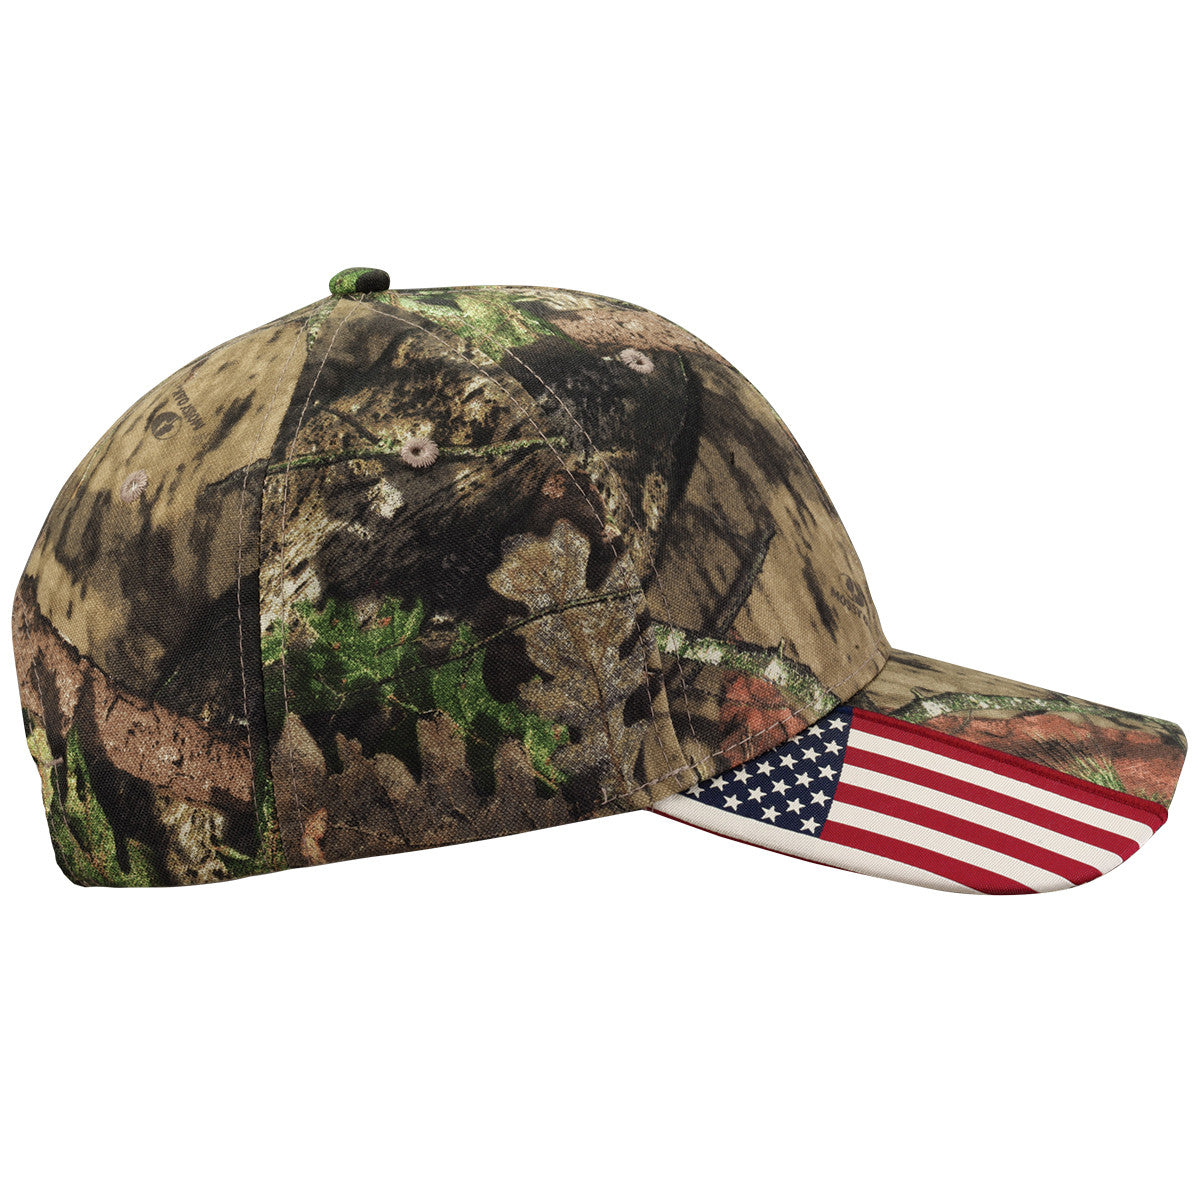 realtree America Flag camo hats for men BRAND NEW w/tags